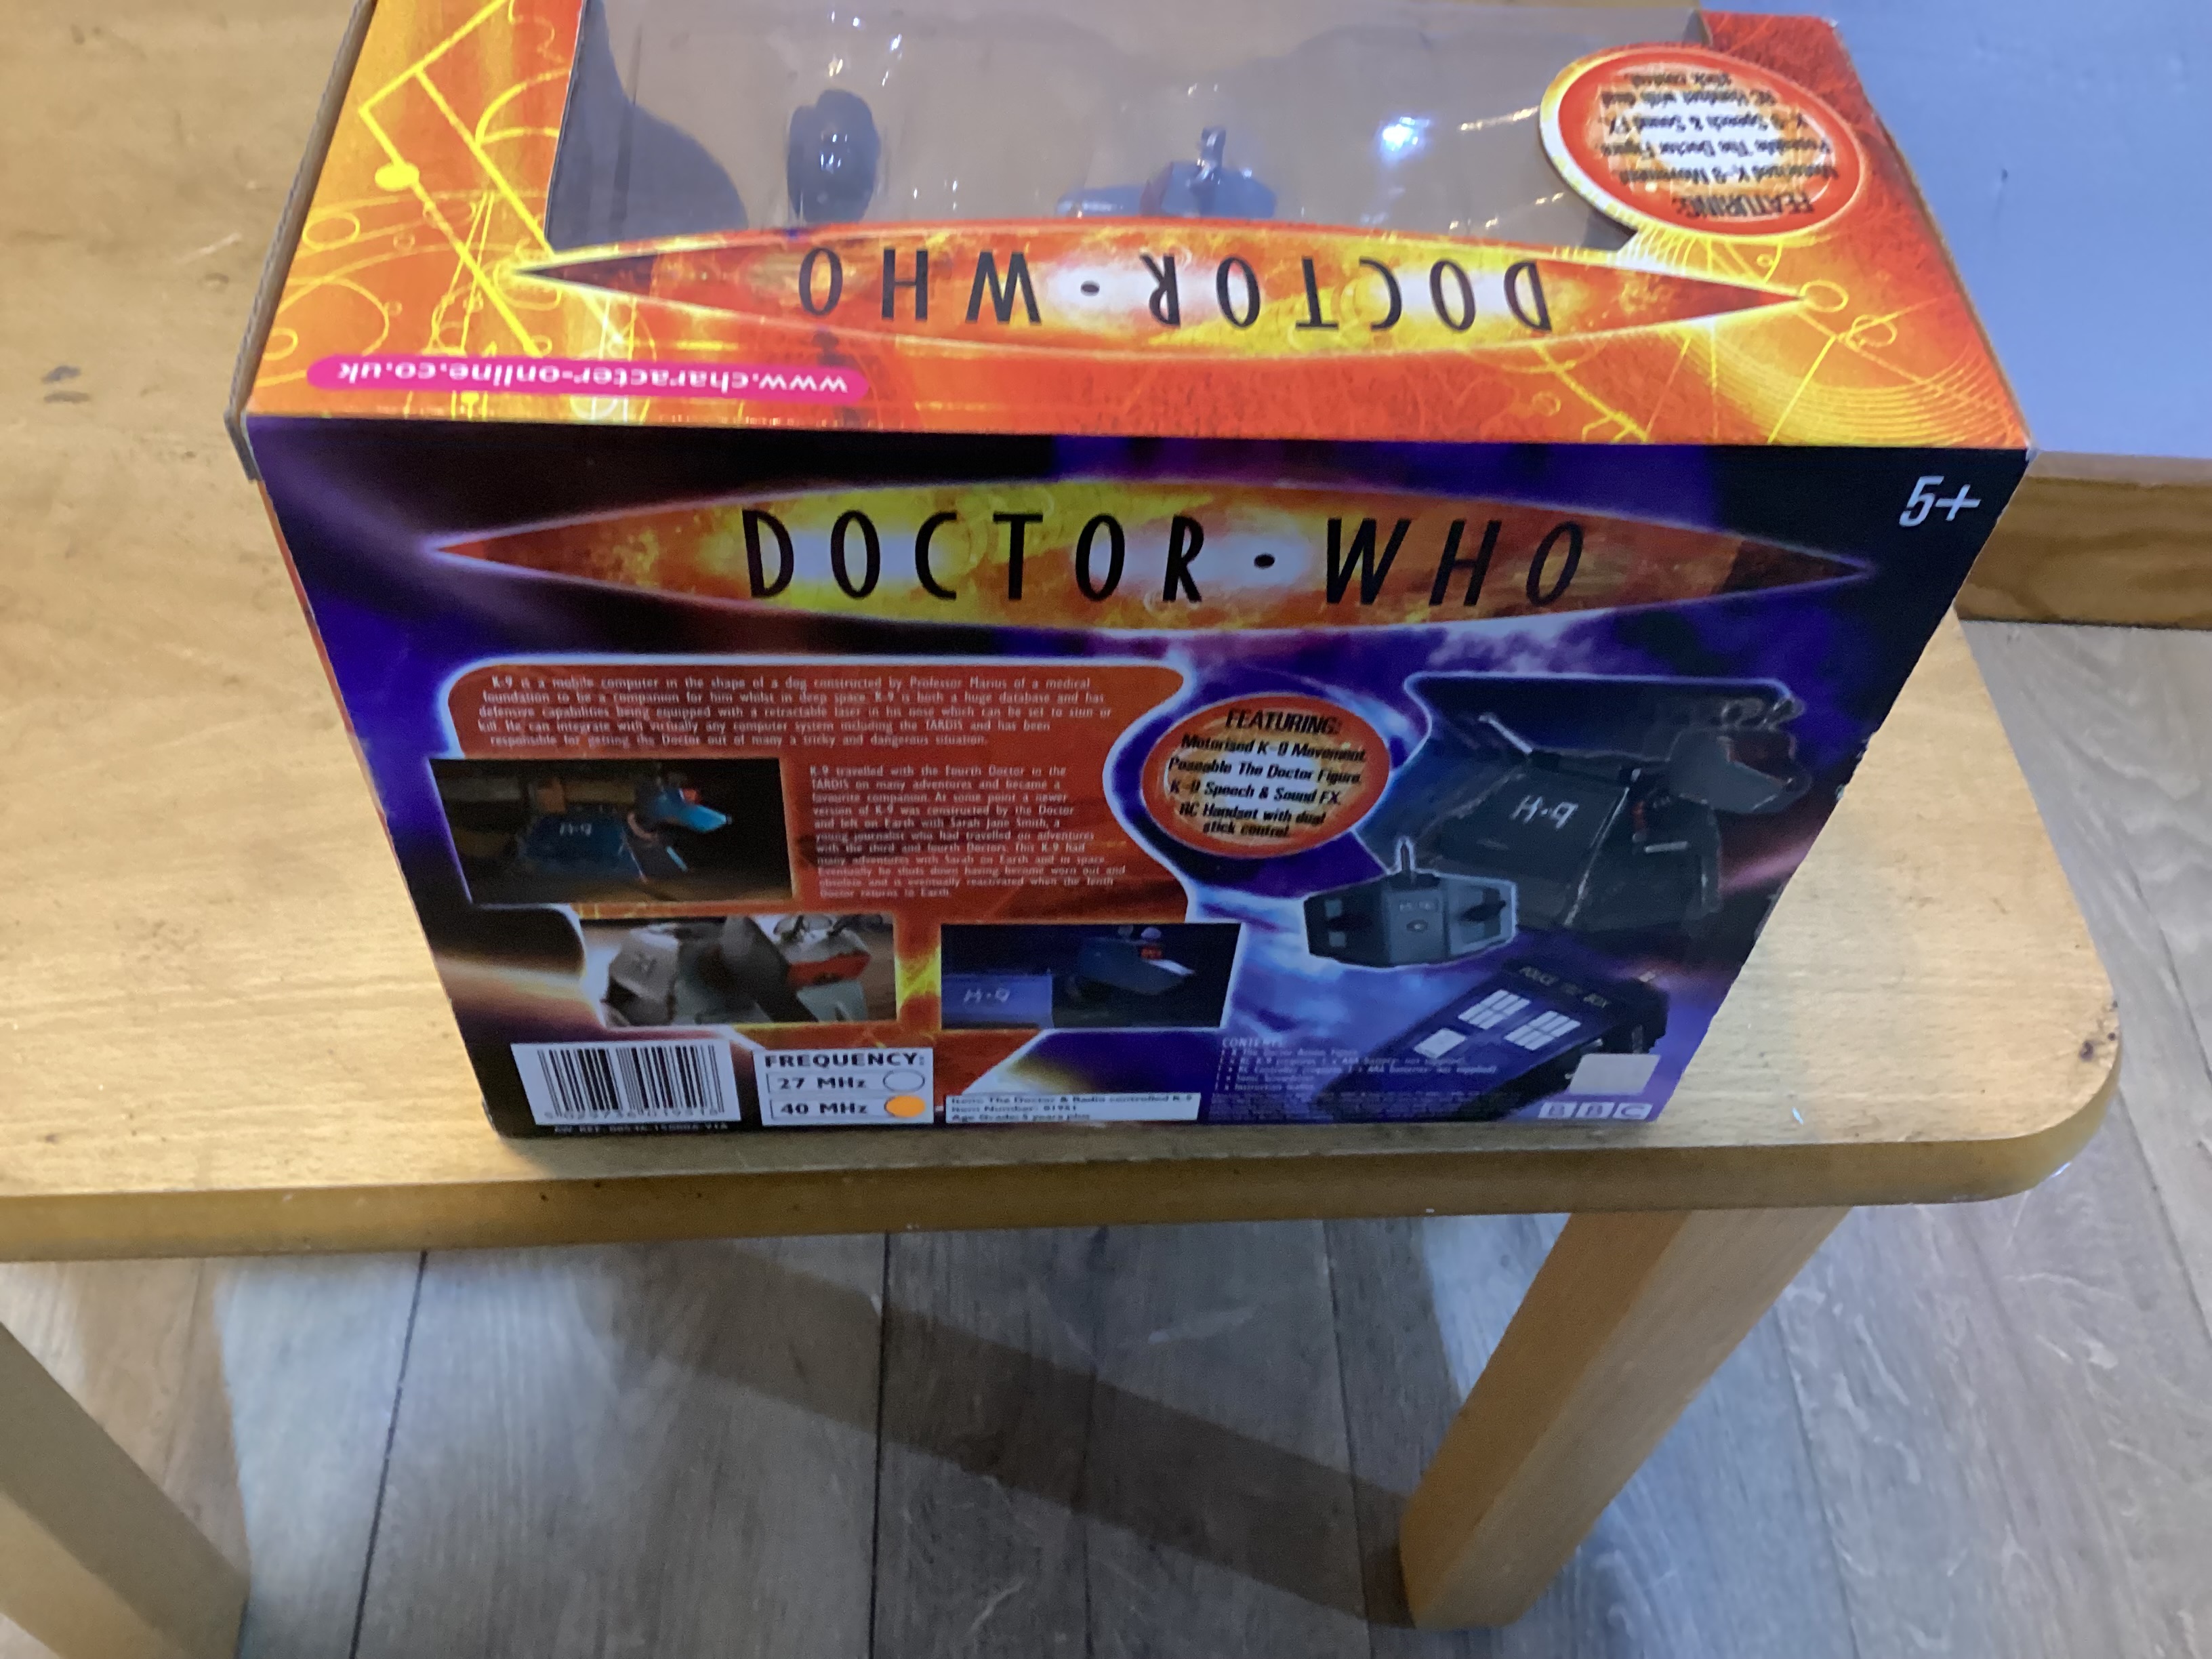 Doctor Who and RC K-9 remote control figures